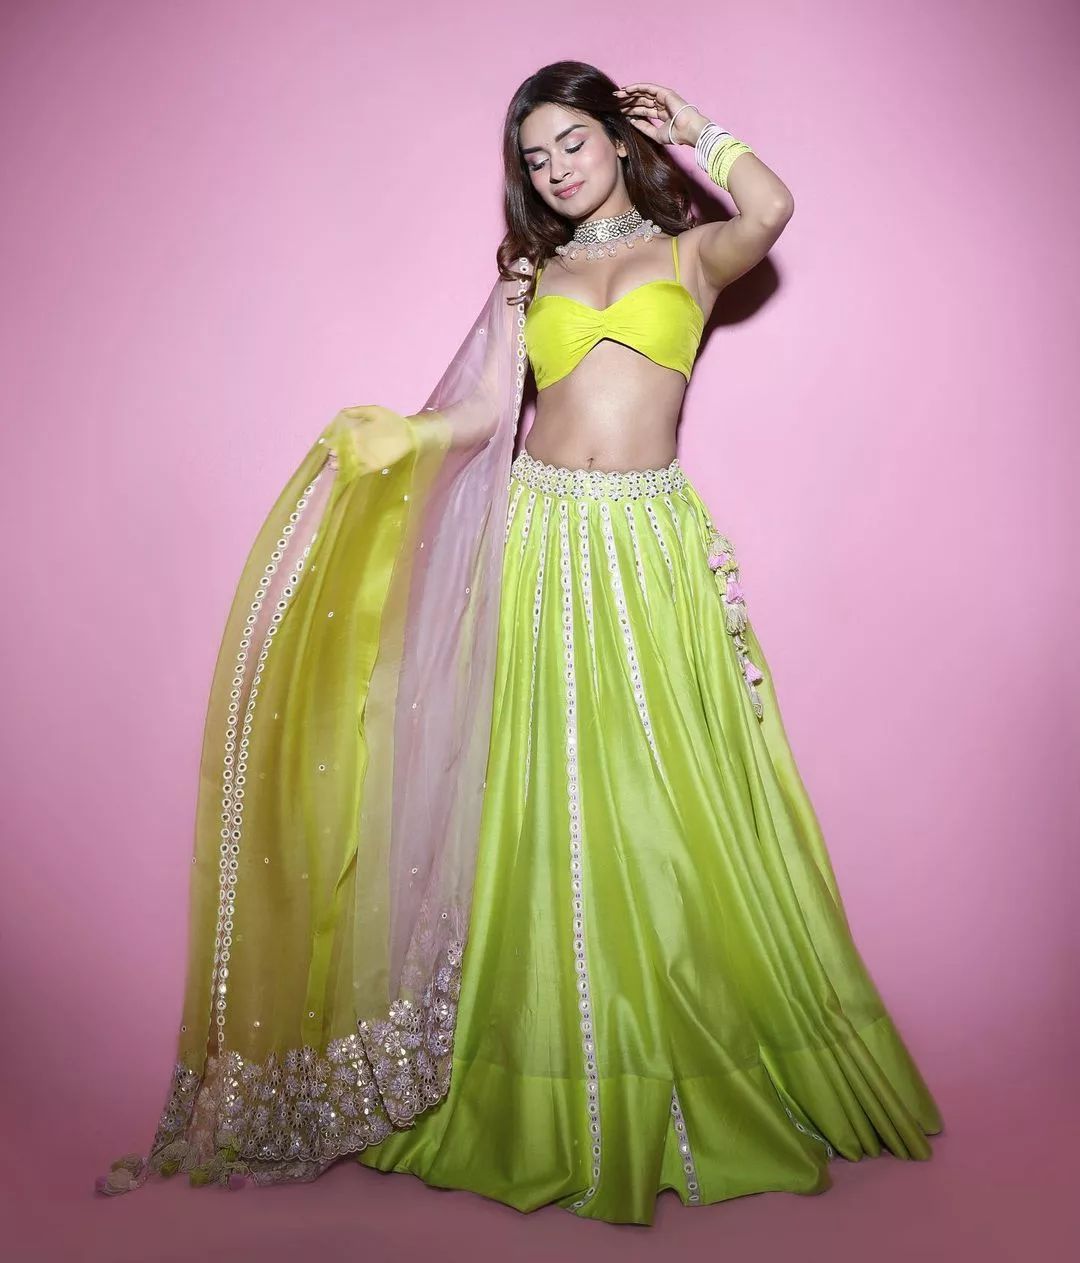 Avneet Kaur's Plunging Neckline in a Lime Green Lehenga: A Daring Fashion Move